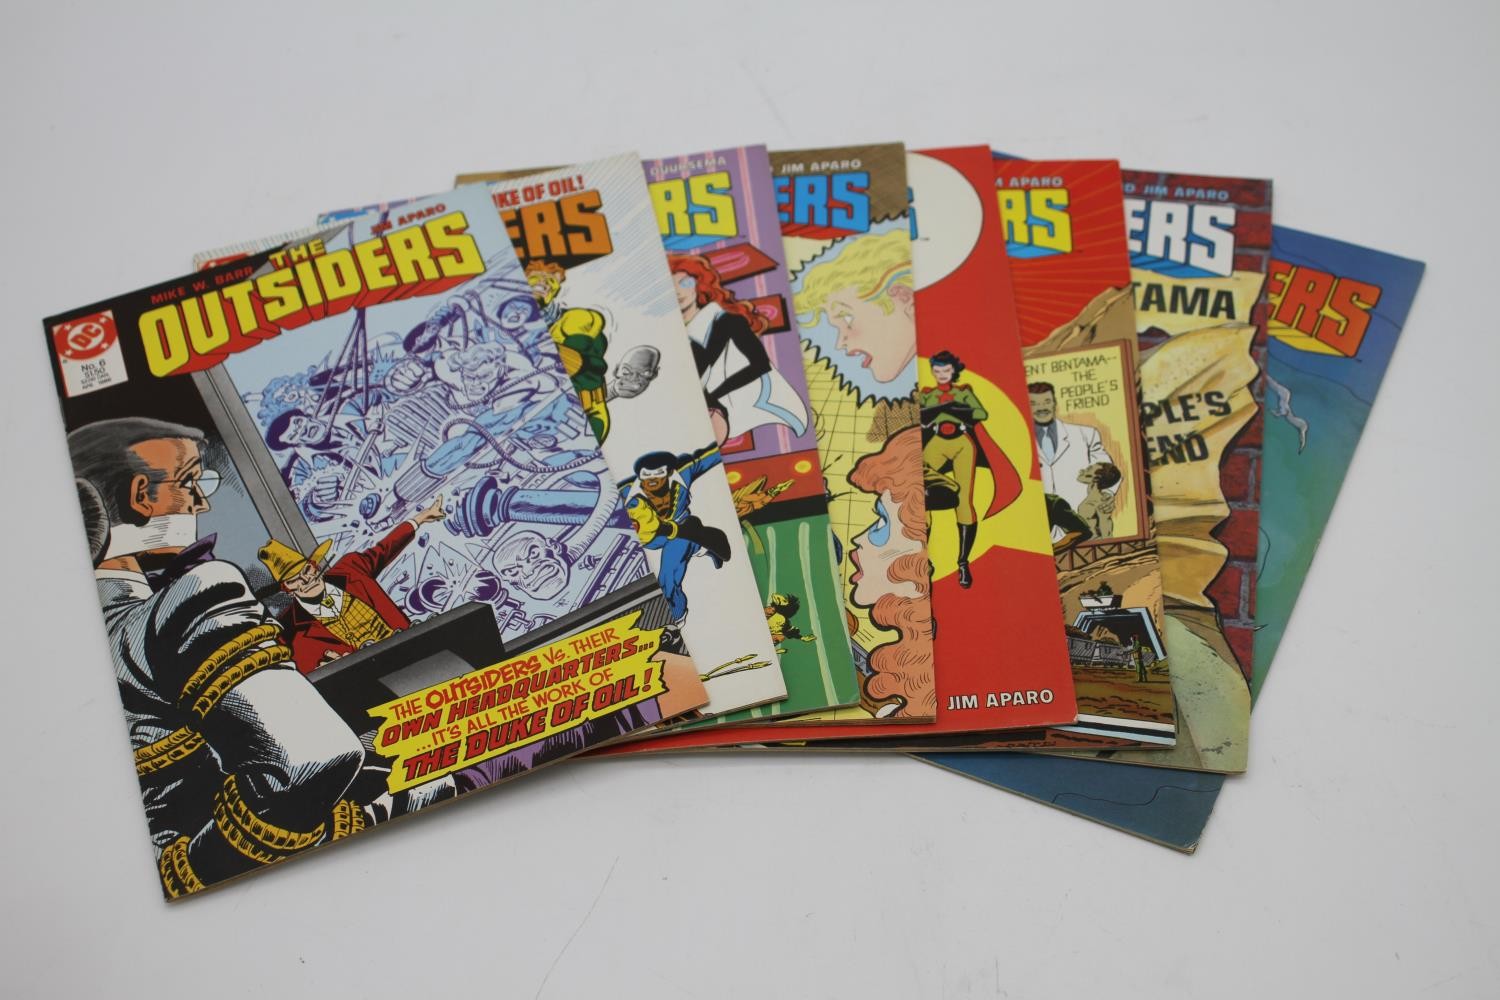 A collection of eight 1986 DC vintage Outsider comics, editions 6,7,8,9,10,11,12 and 13.